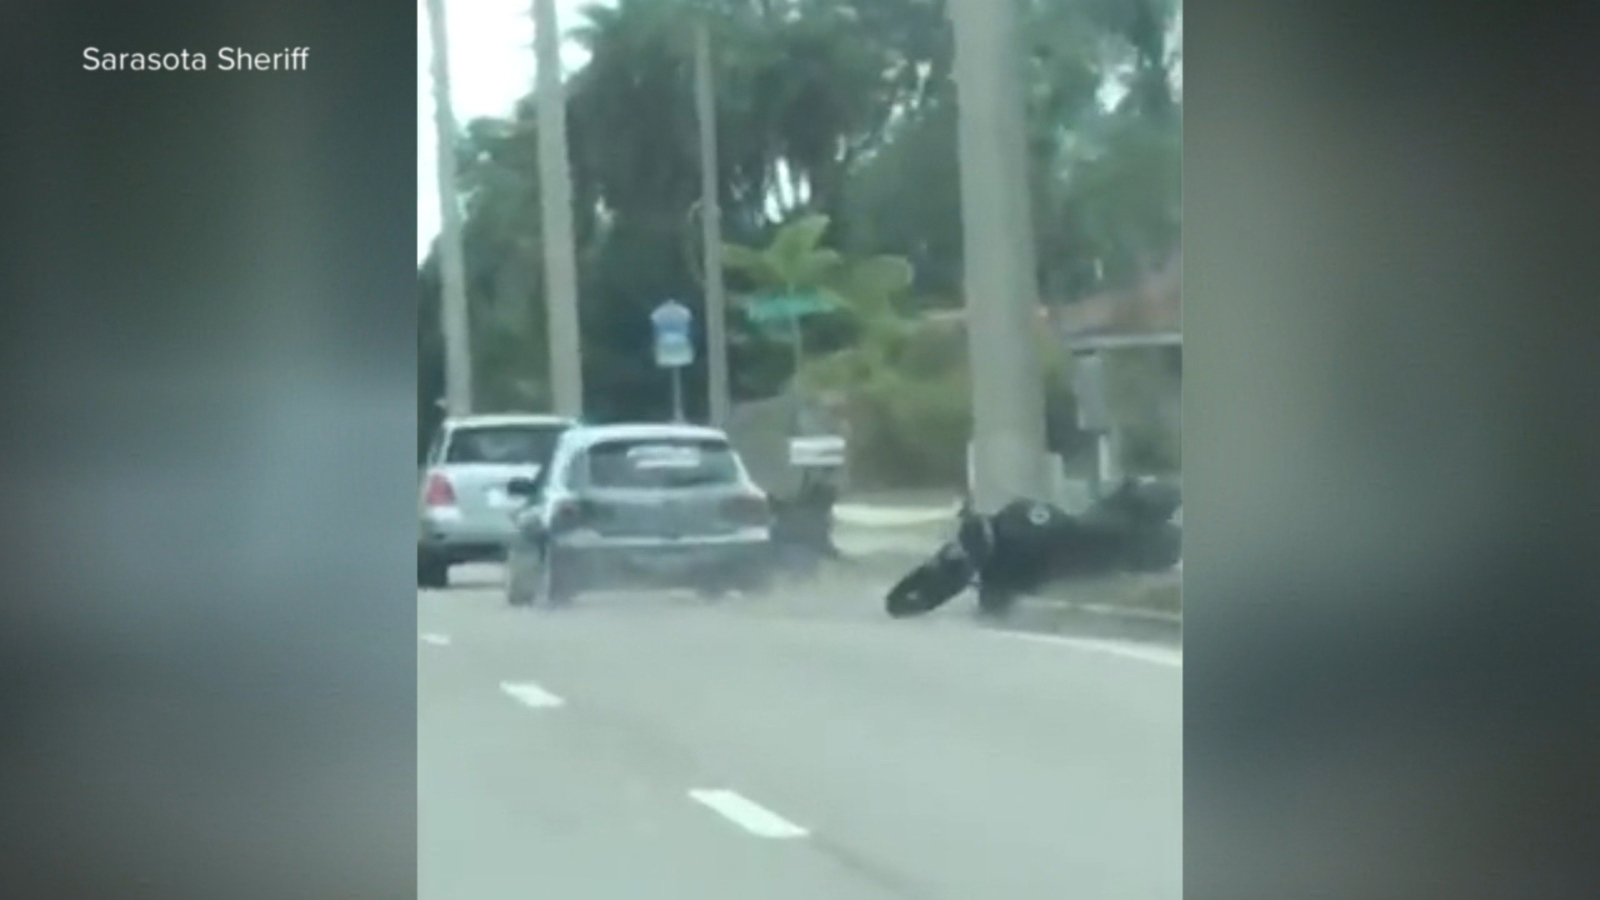 PHOTO: Video captured a road rage incident in Sarasota, Fla., where a driver intentionally rams a motorcyclist off the road, April 8, 2018.